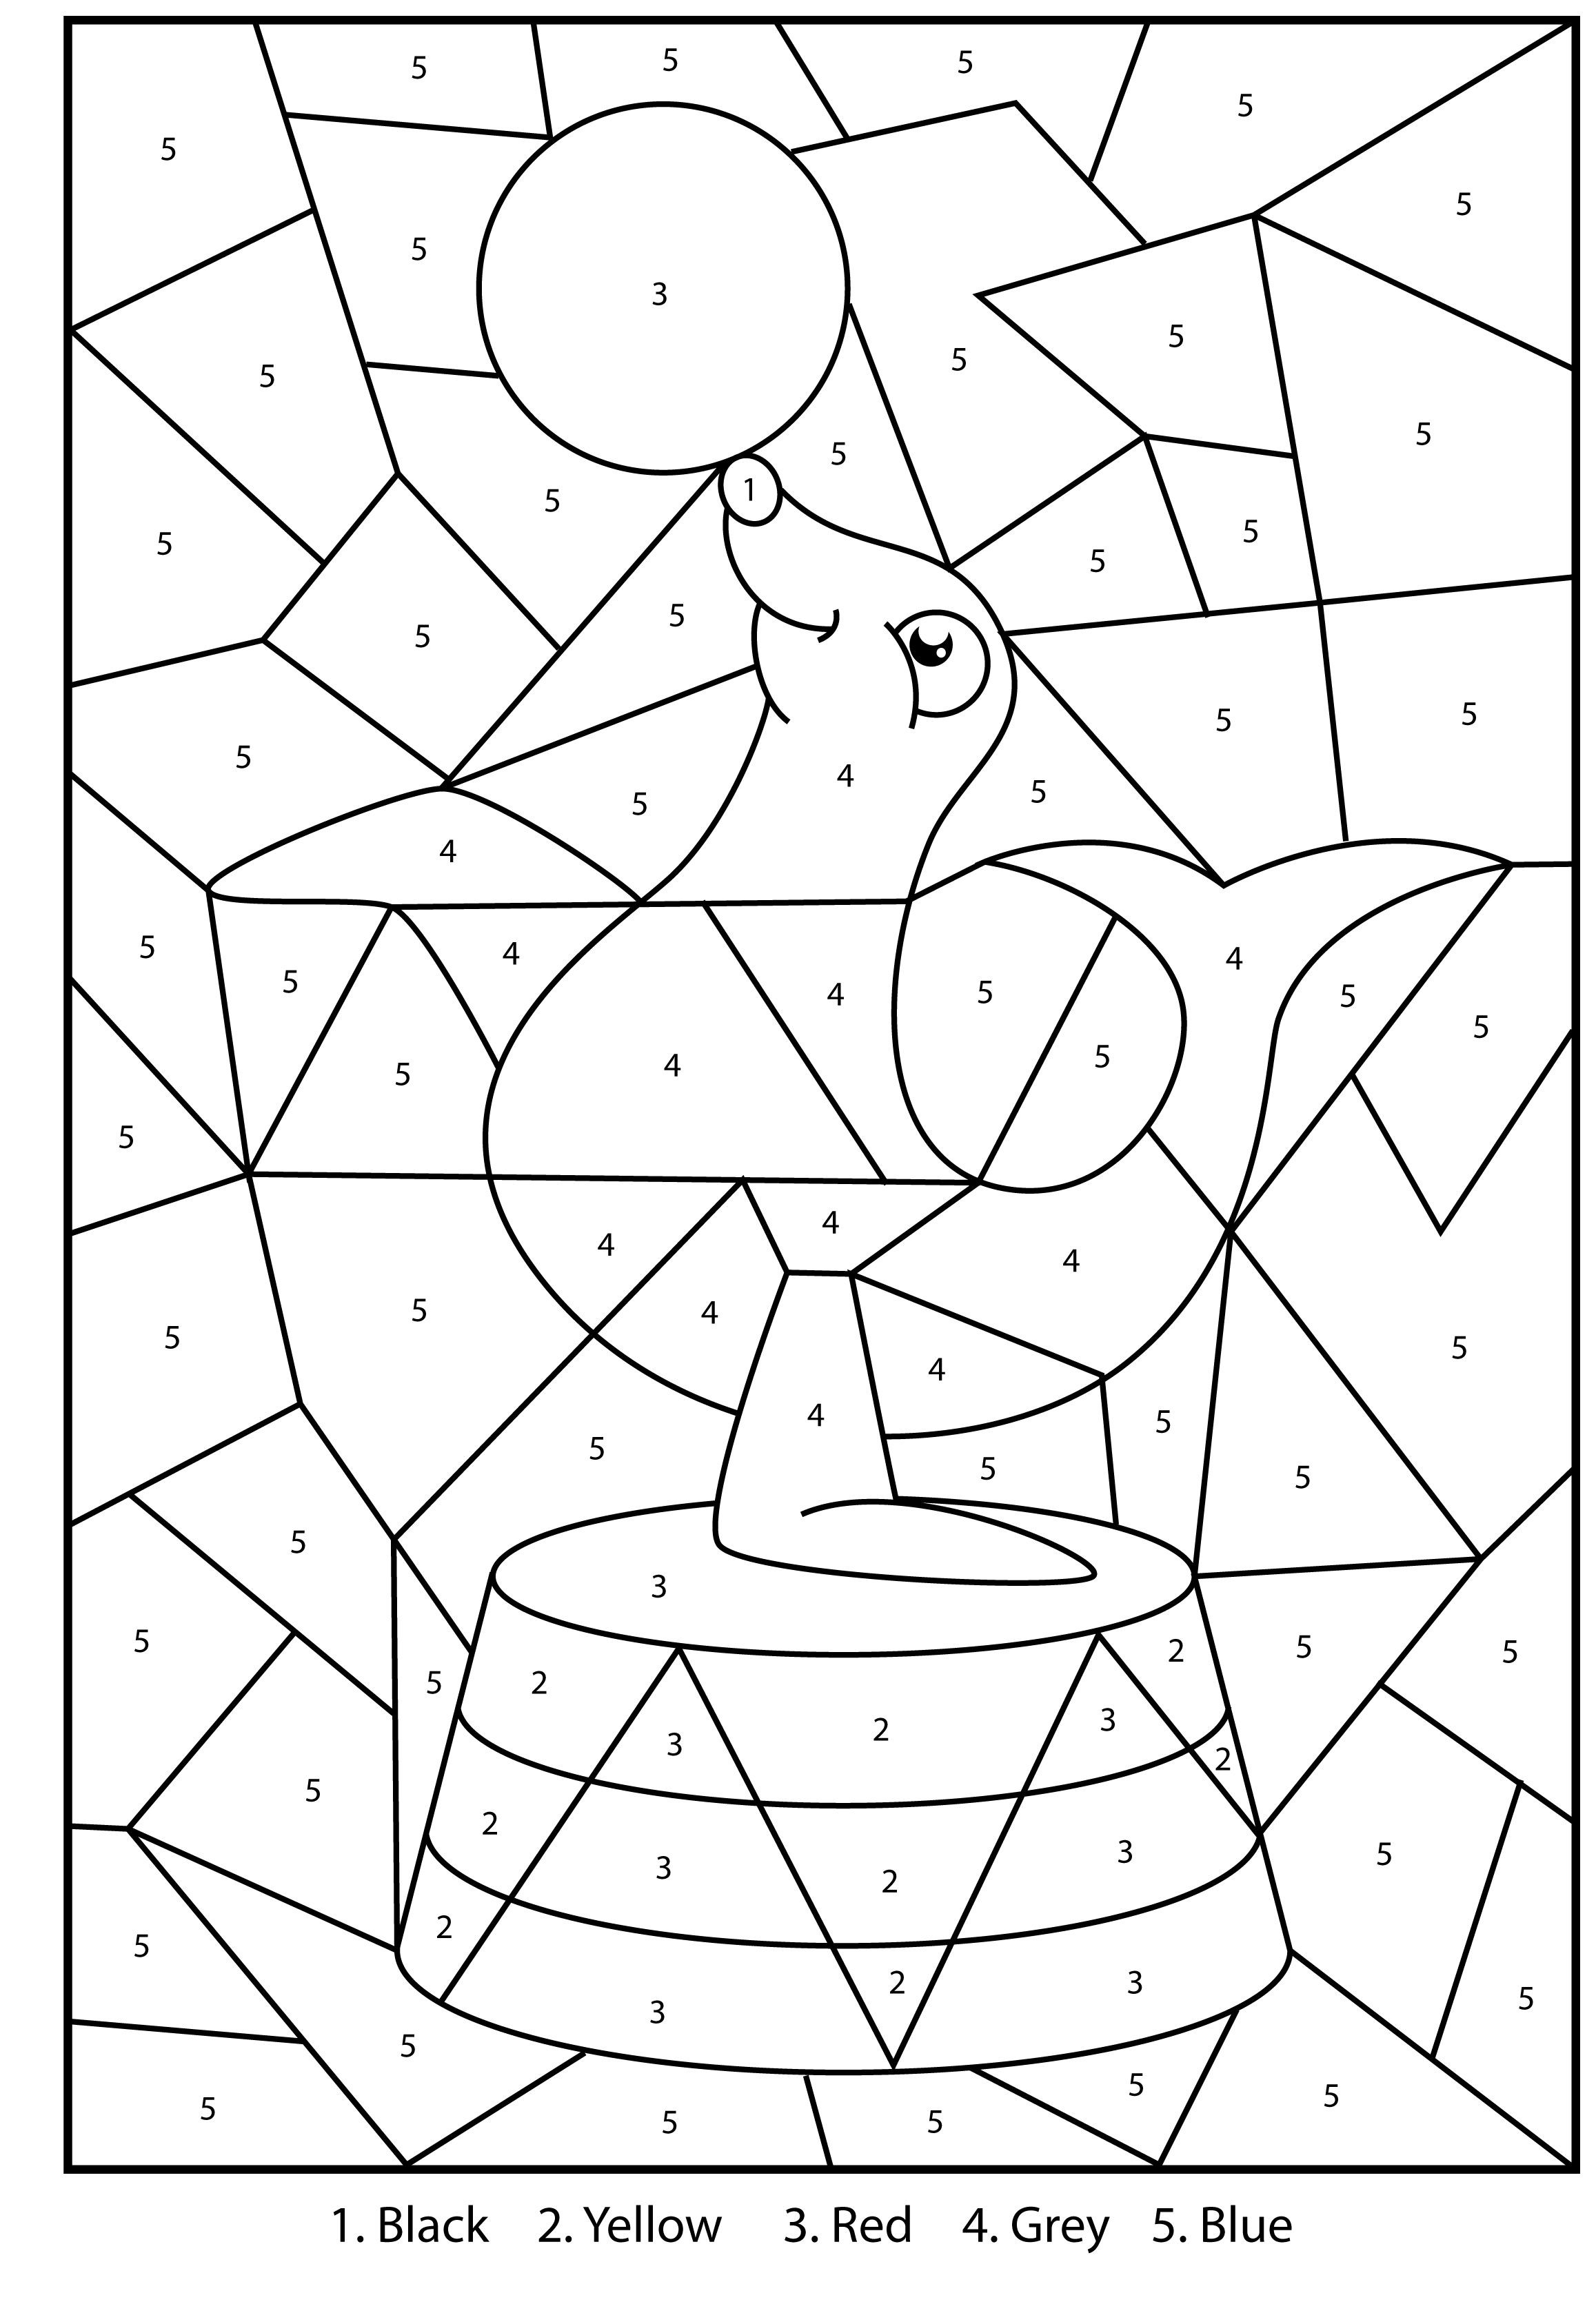 30 of the best ideas for coloring by number pages for boys home